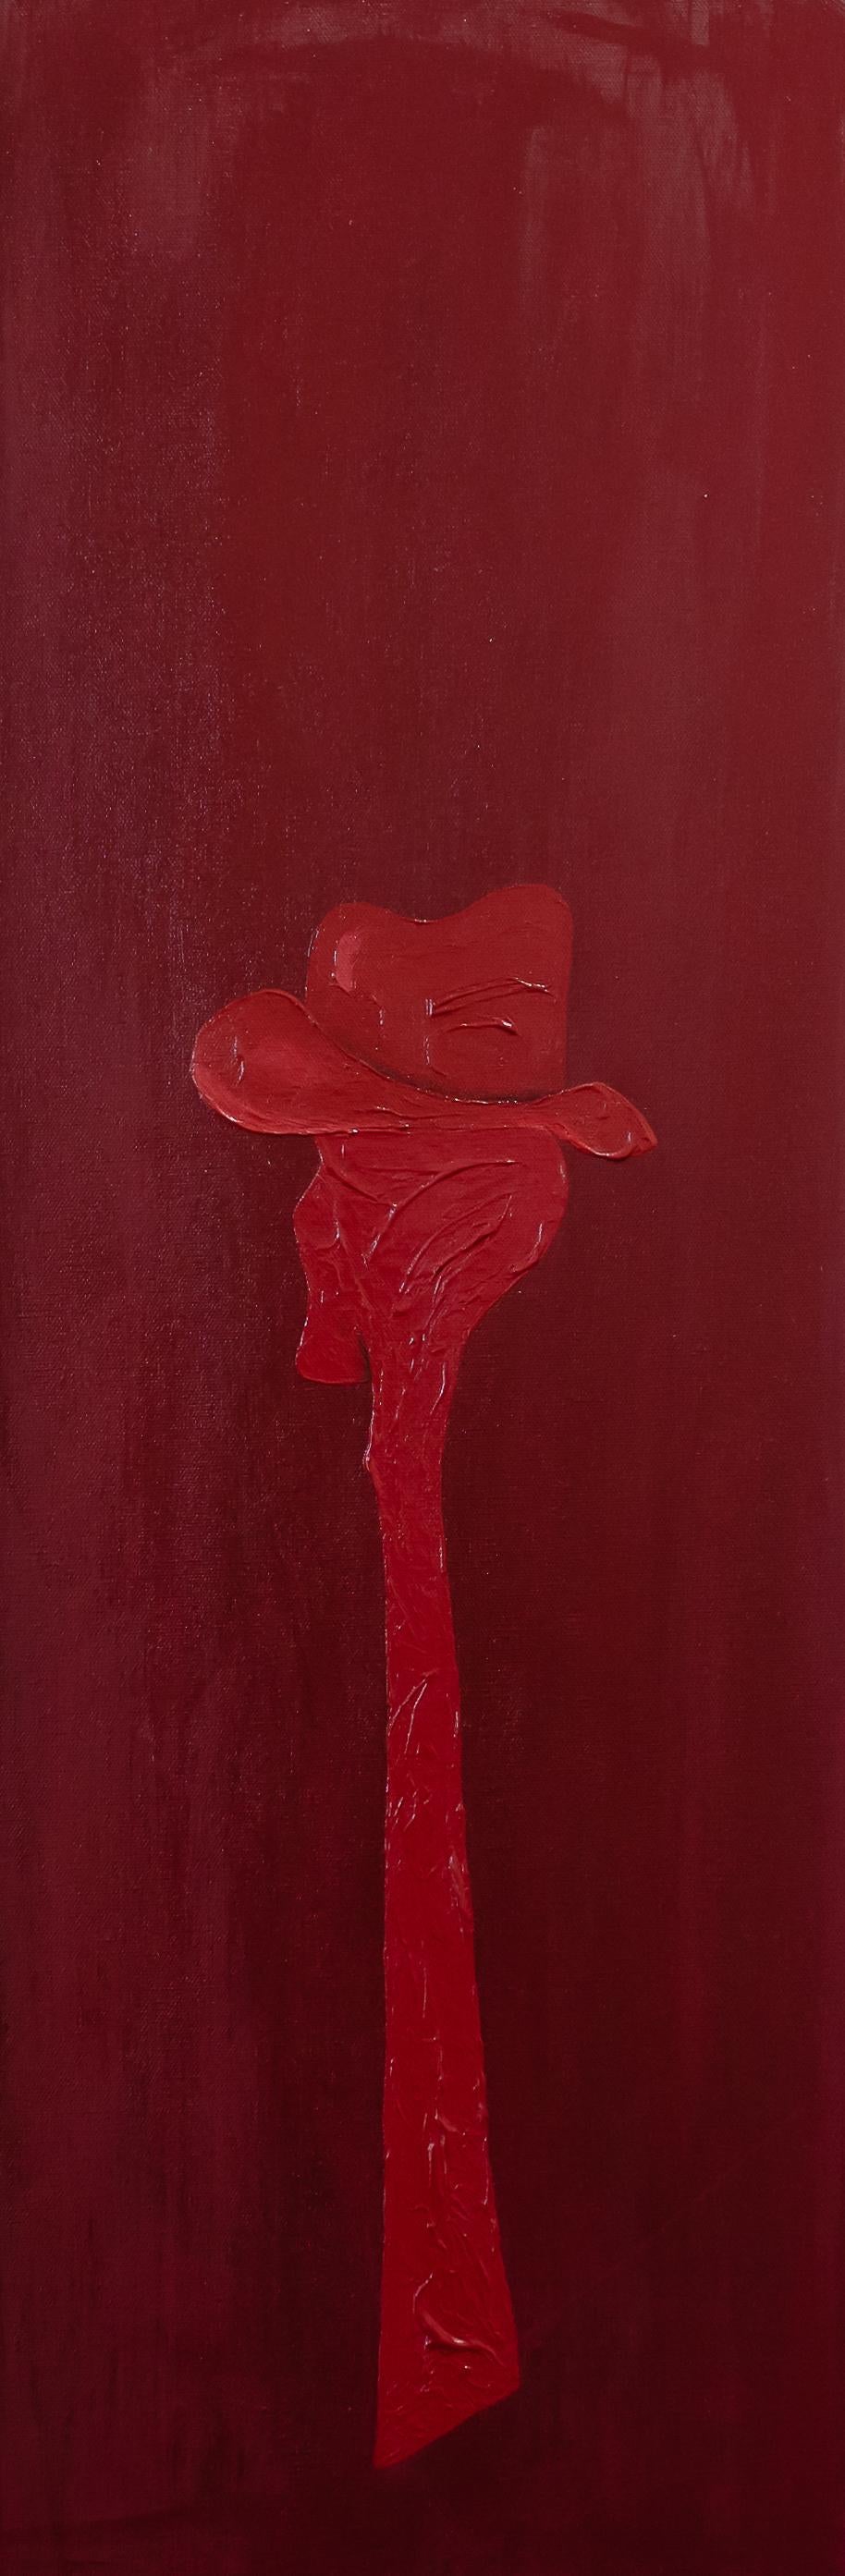 Trenity Thomas Figurative Painting - Red Cowboy